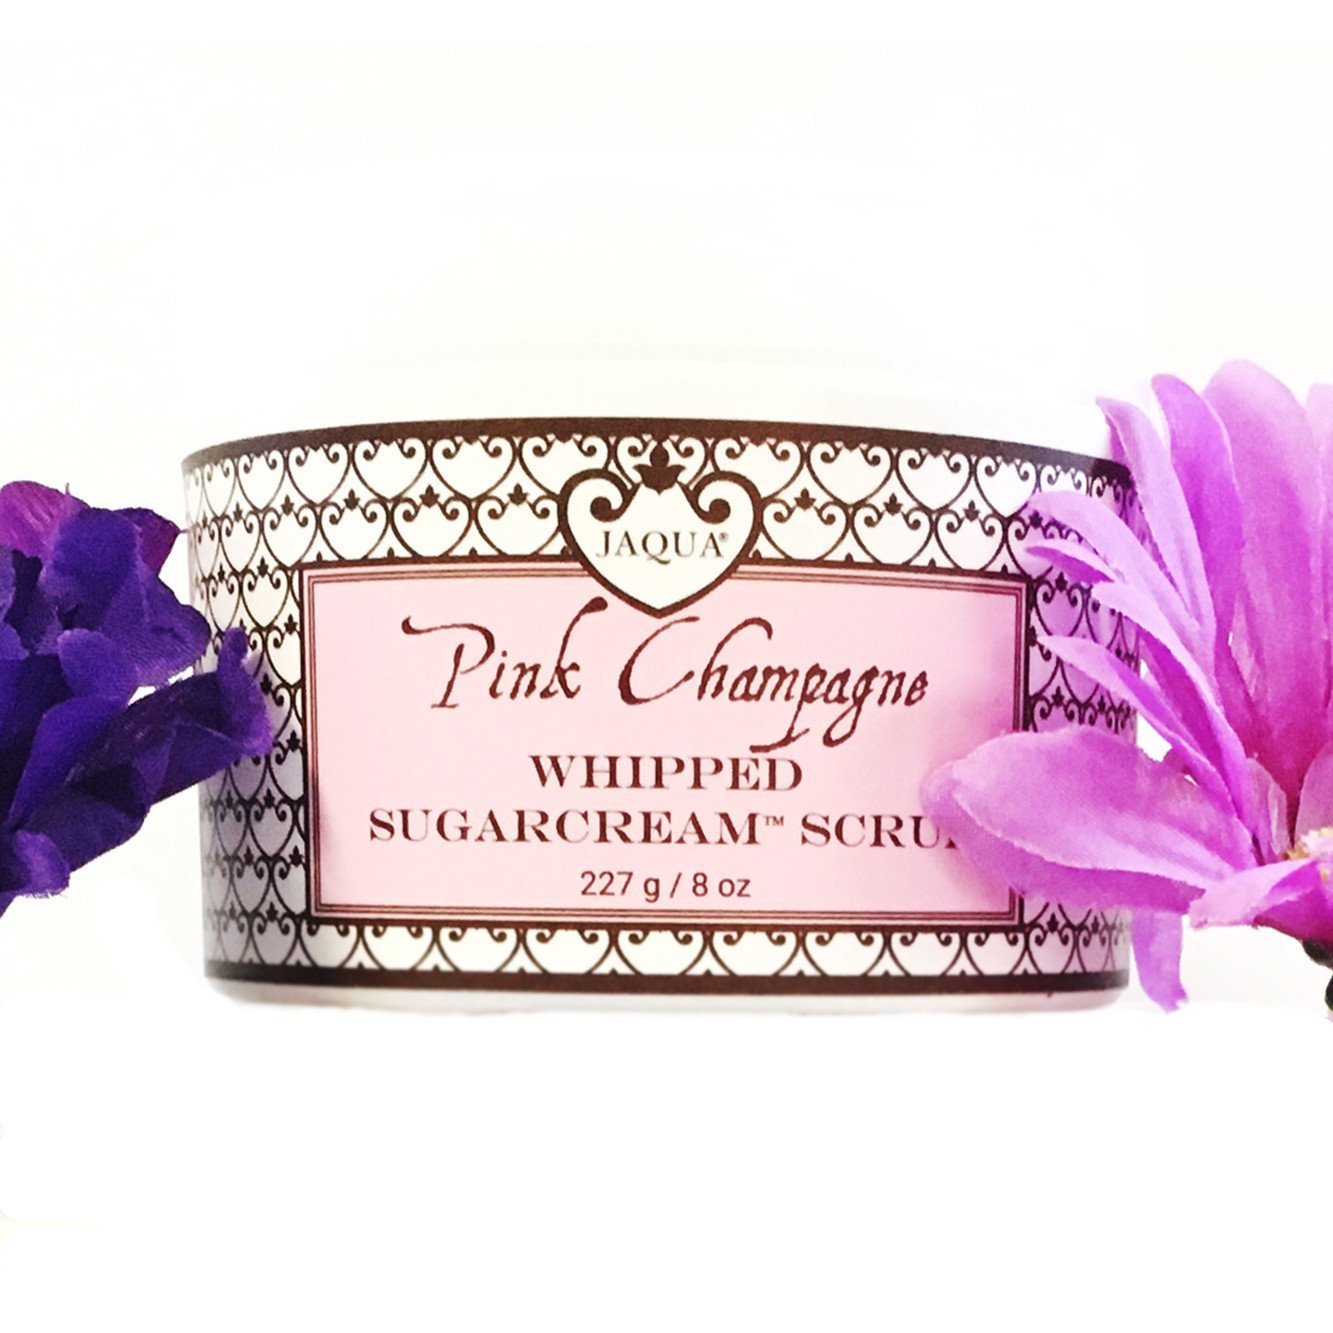 Primary image for Pink Champagne Whipped SugarCream Scrub